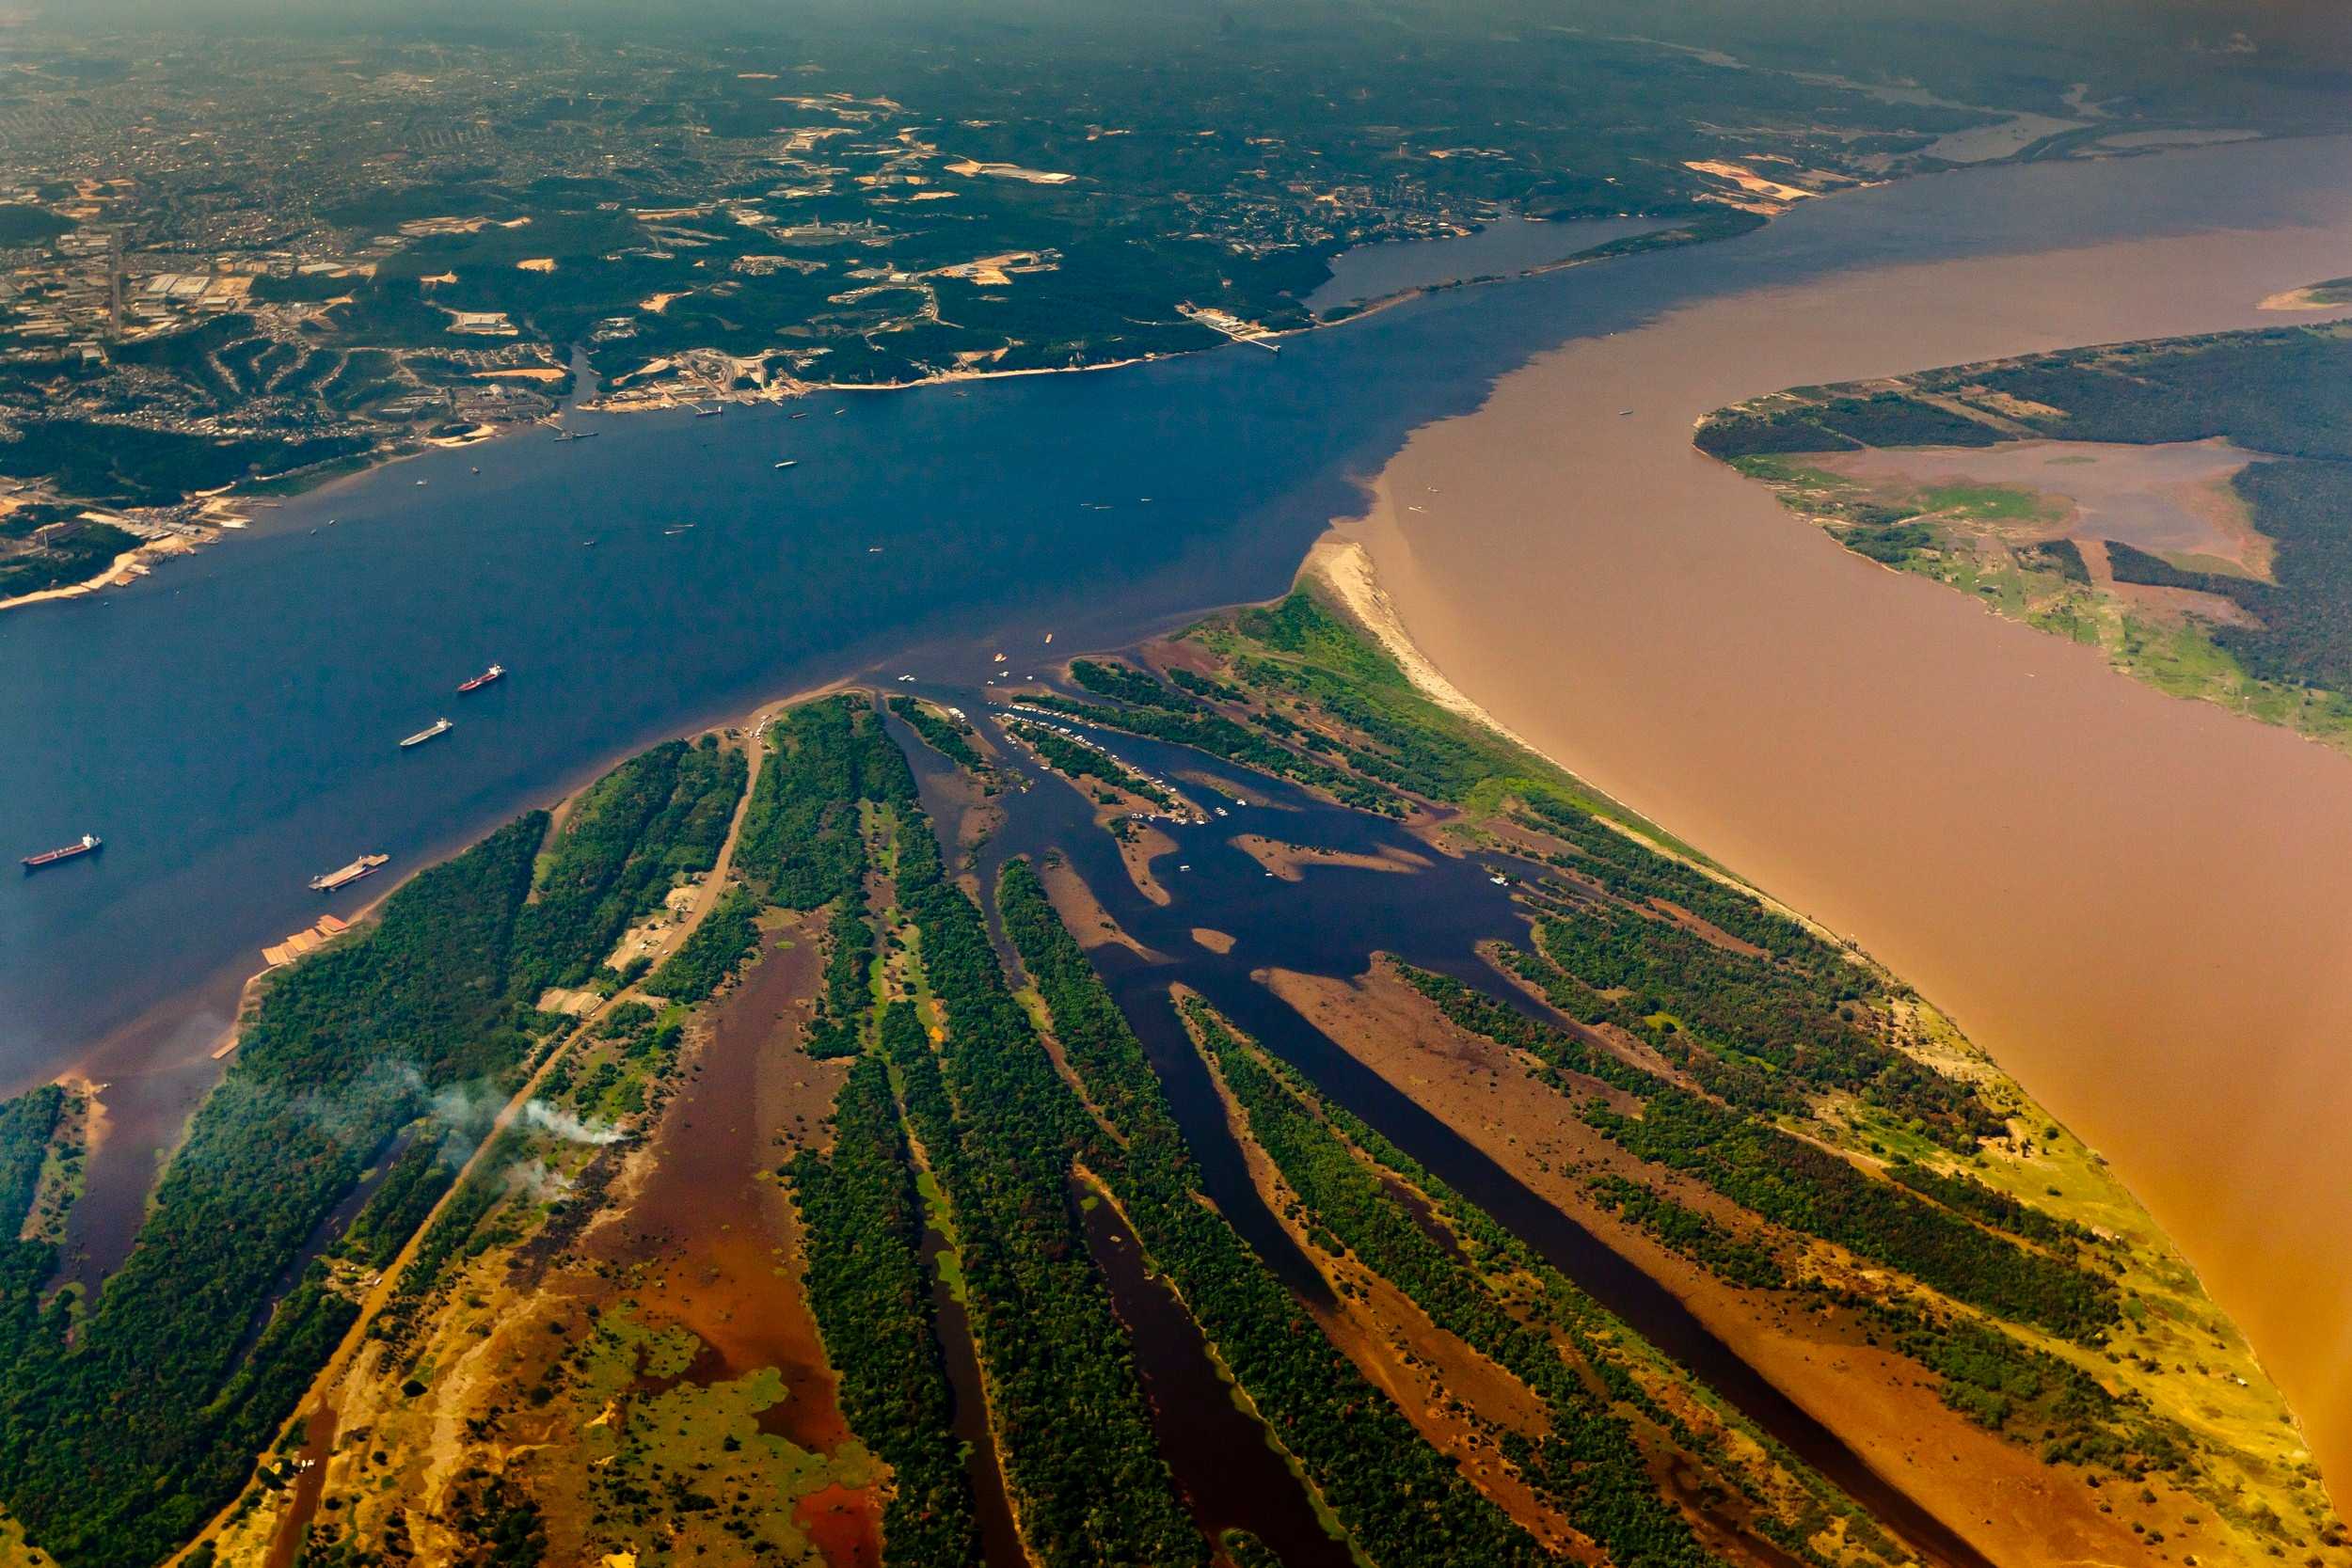 The confluence of the Rio Negro and the Amazon